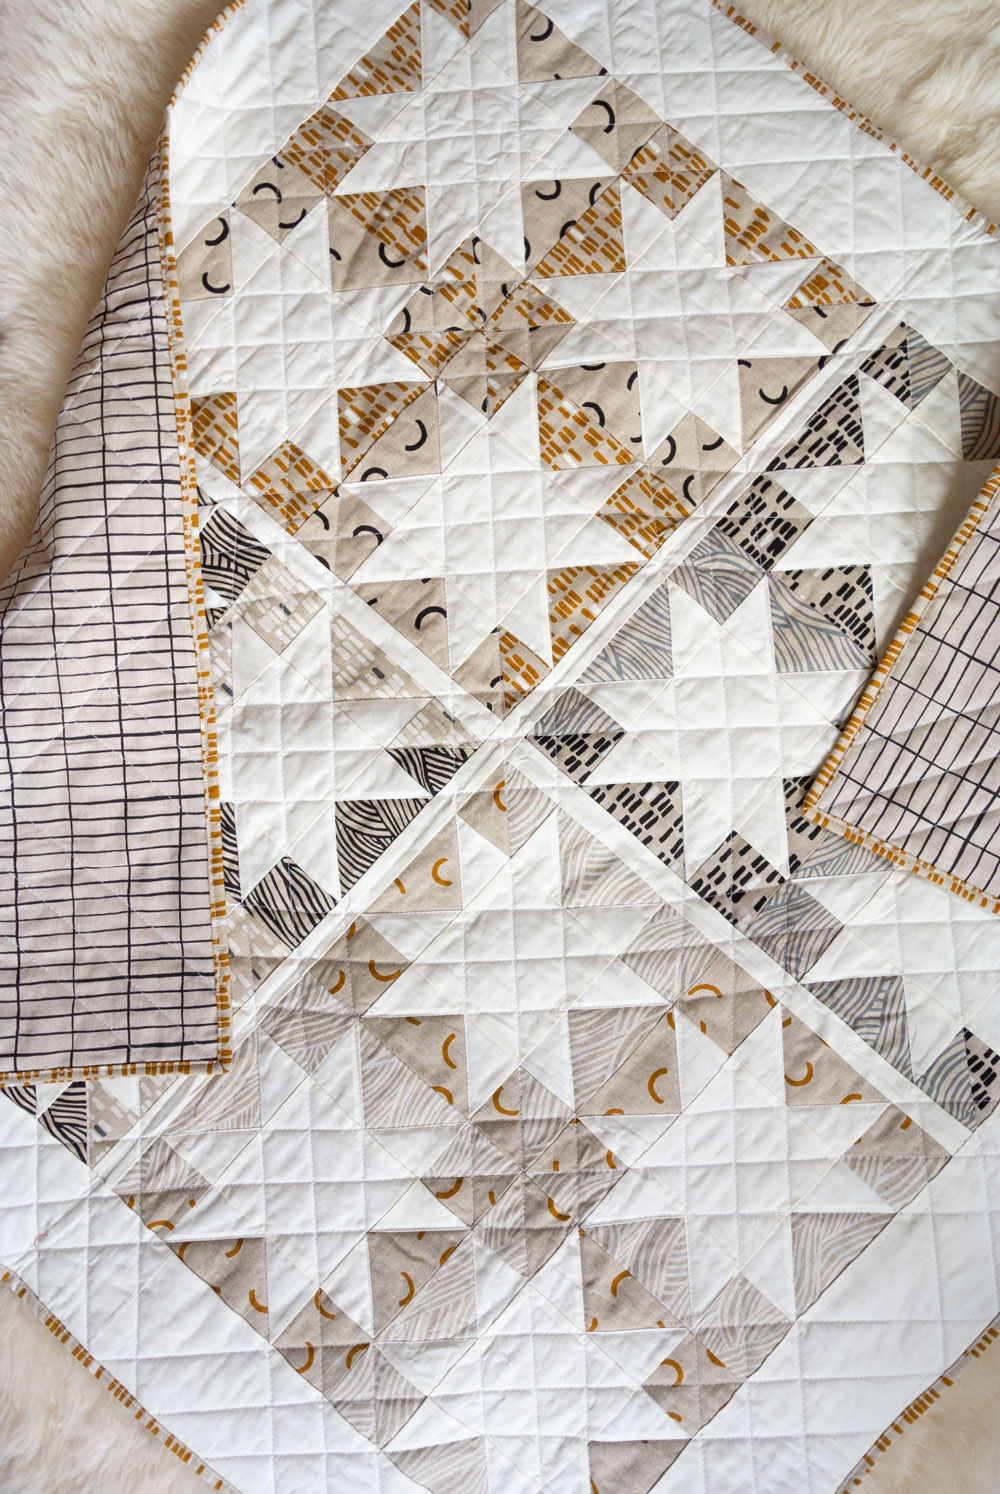 Make a sophisticated, neutral quilt using the Stars Hollow quilt pattern. This is a classic quilt pattern, but with a modern twist. The design plays on negative space to create traditional sawtooth star quilt blocks. suzyquilts.com #linen #quilt